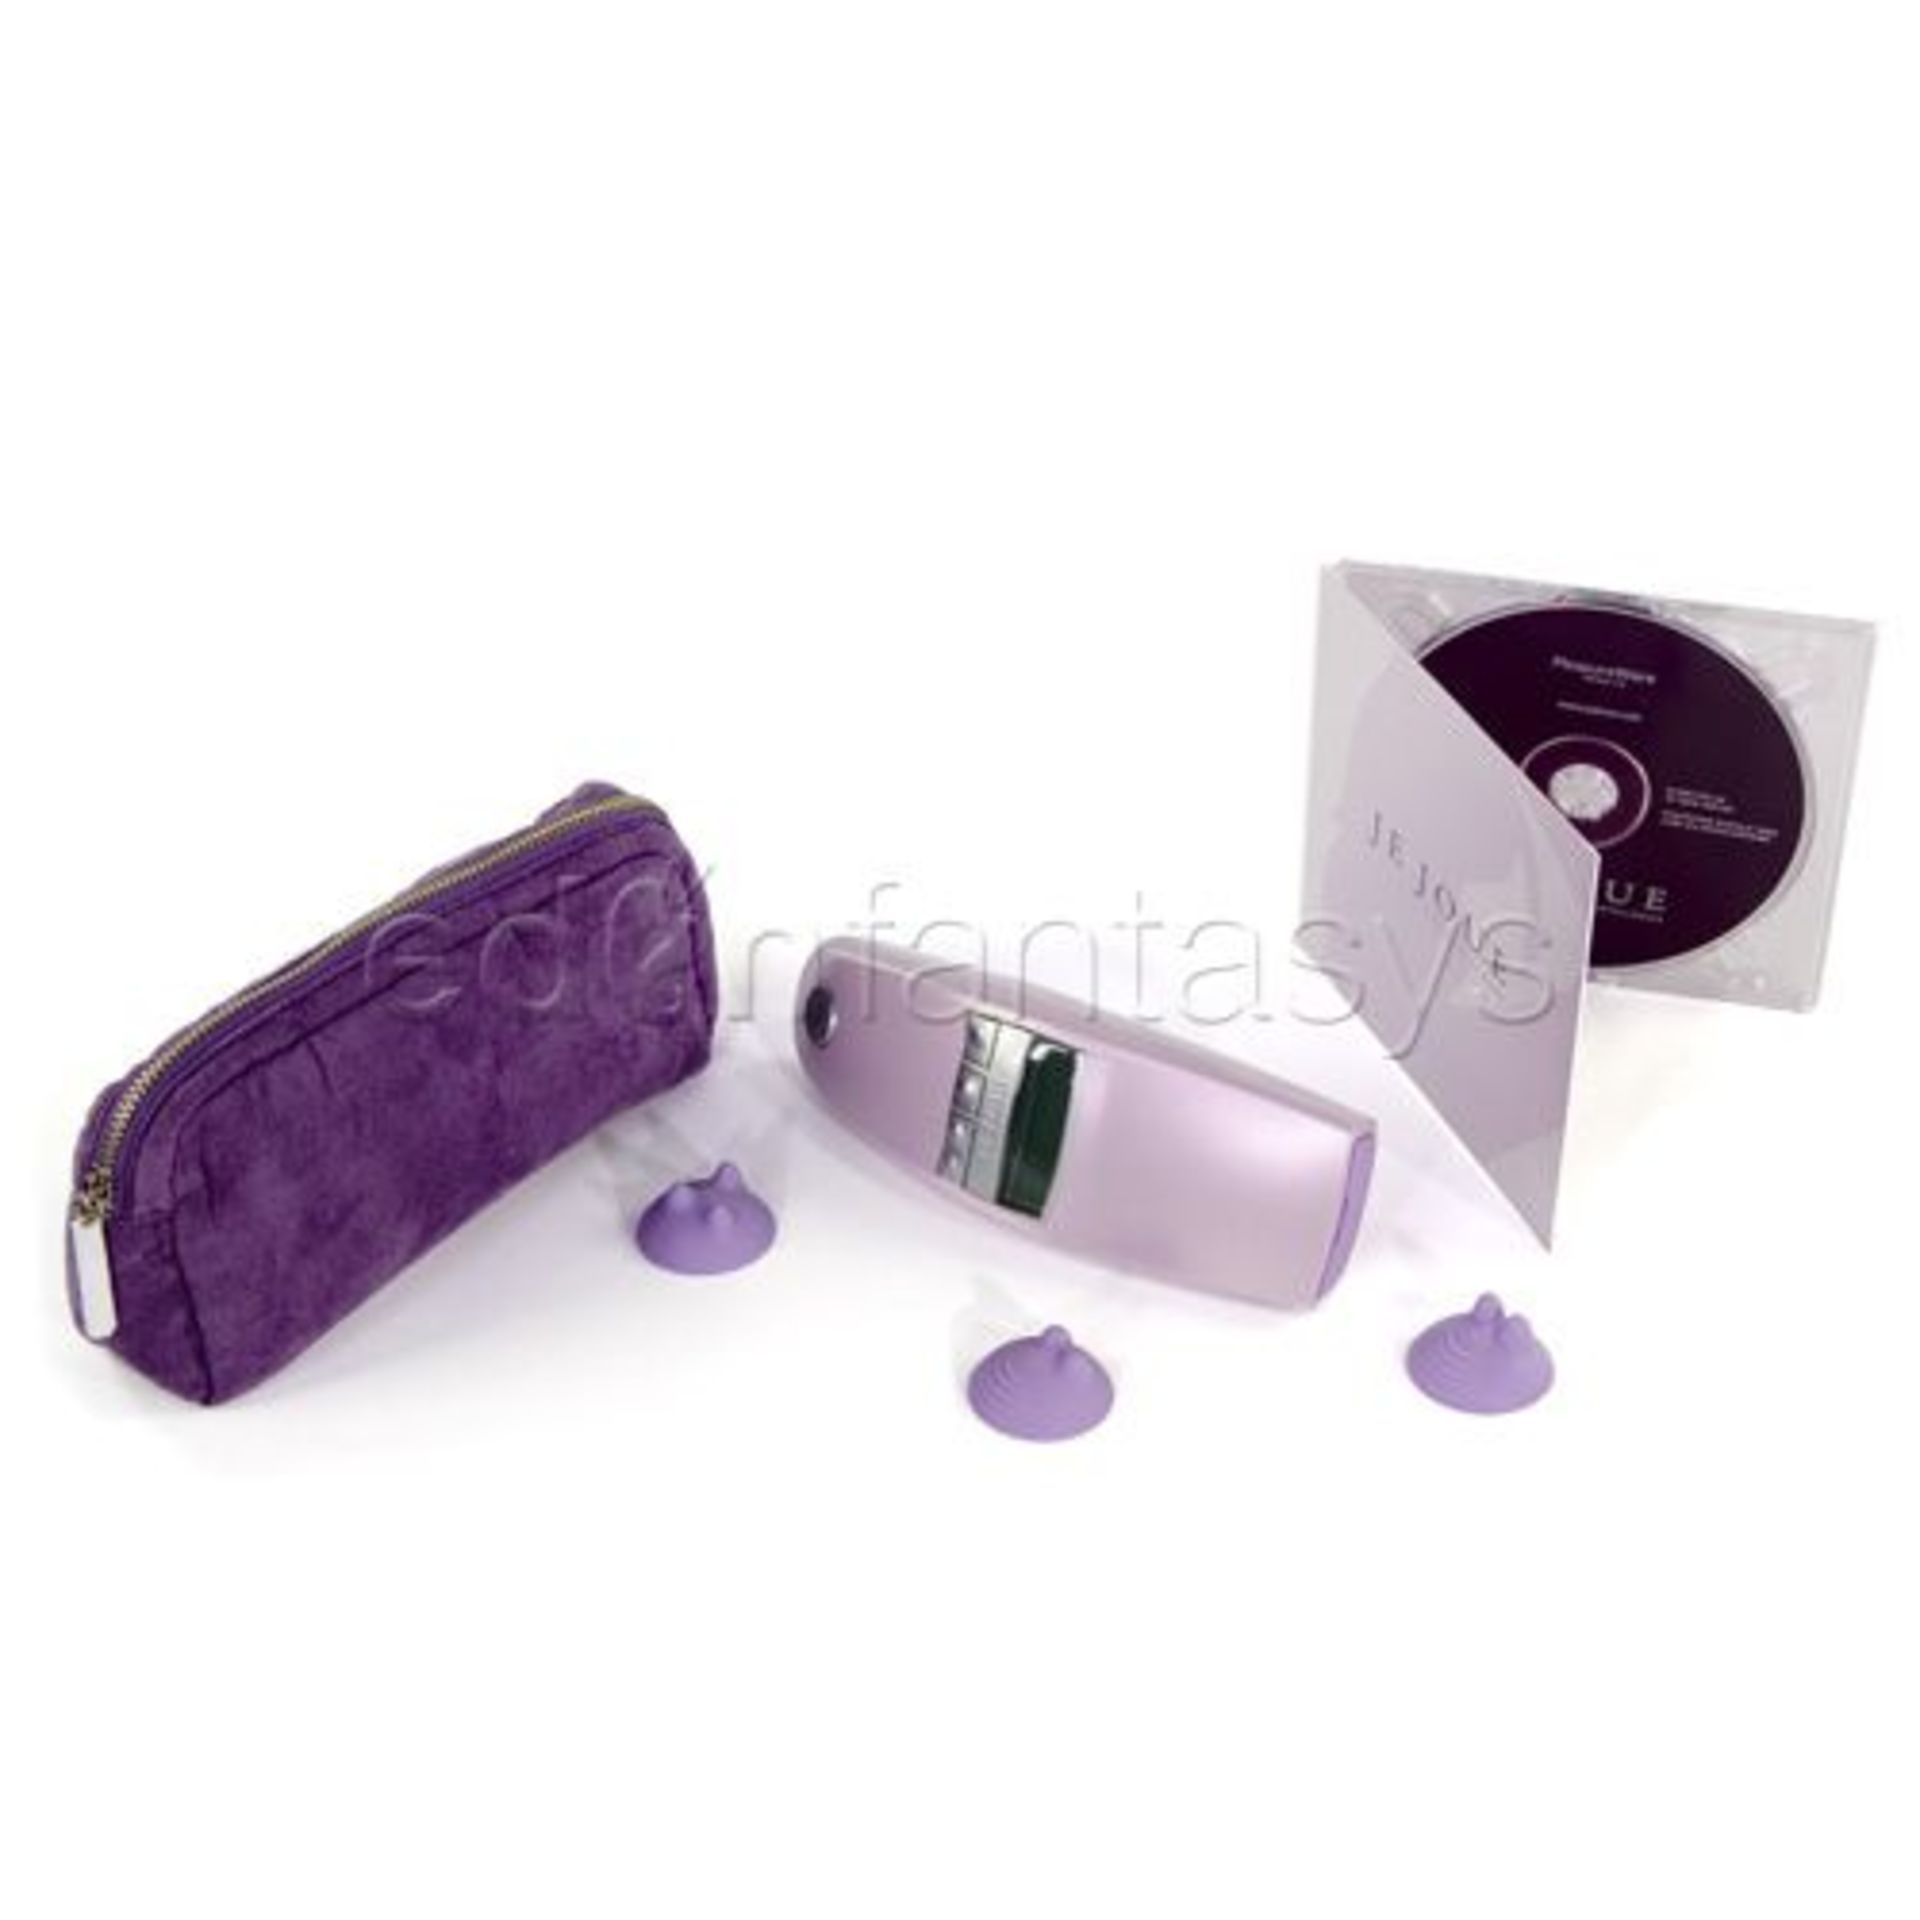 5 x Je Joue Sensual Intelligence with PleasureWare Software & Grooves. RRP £349.99 - Image 6 of 6